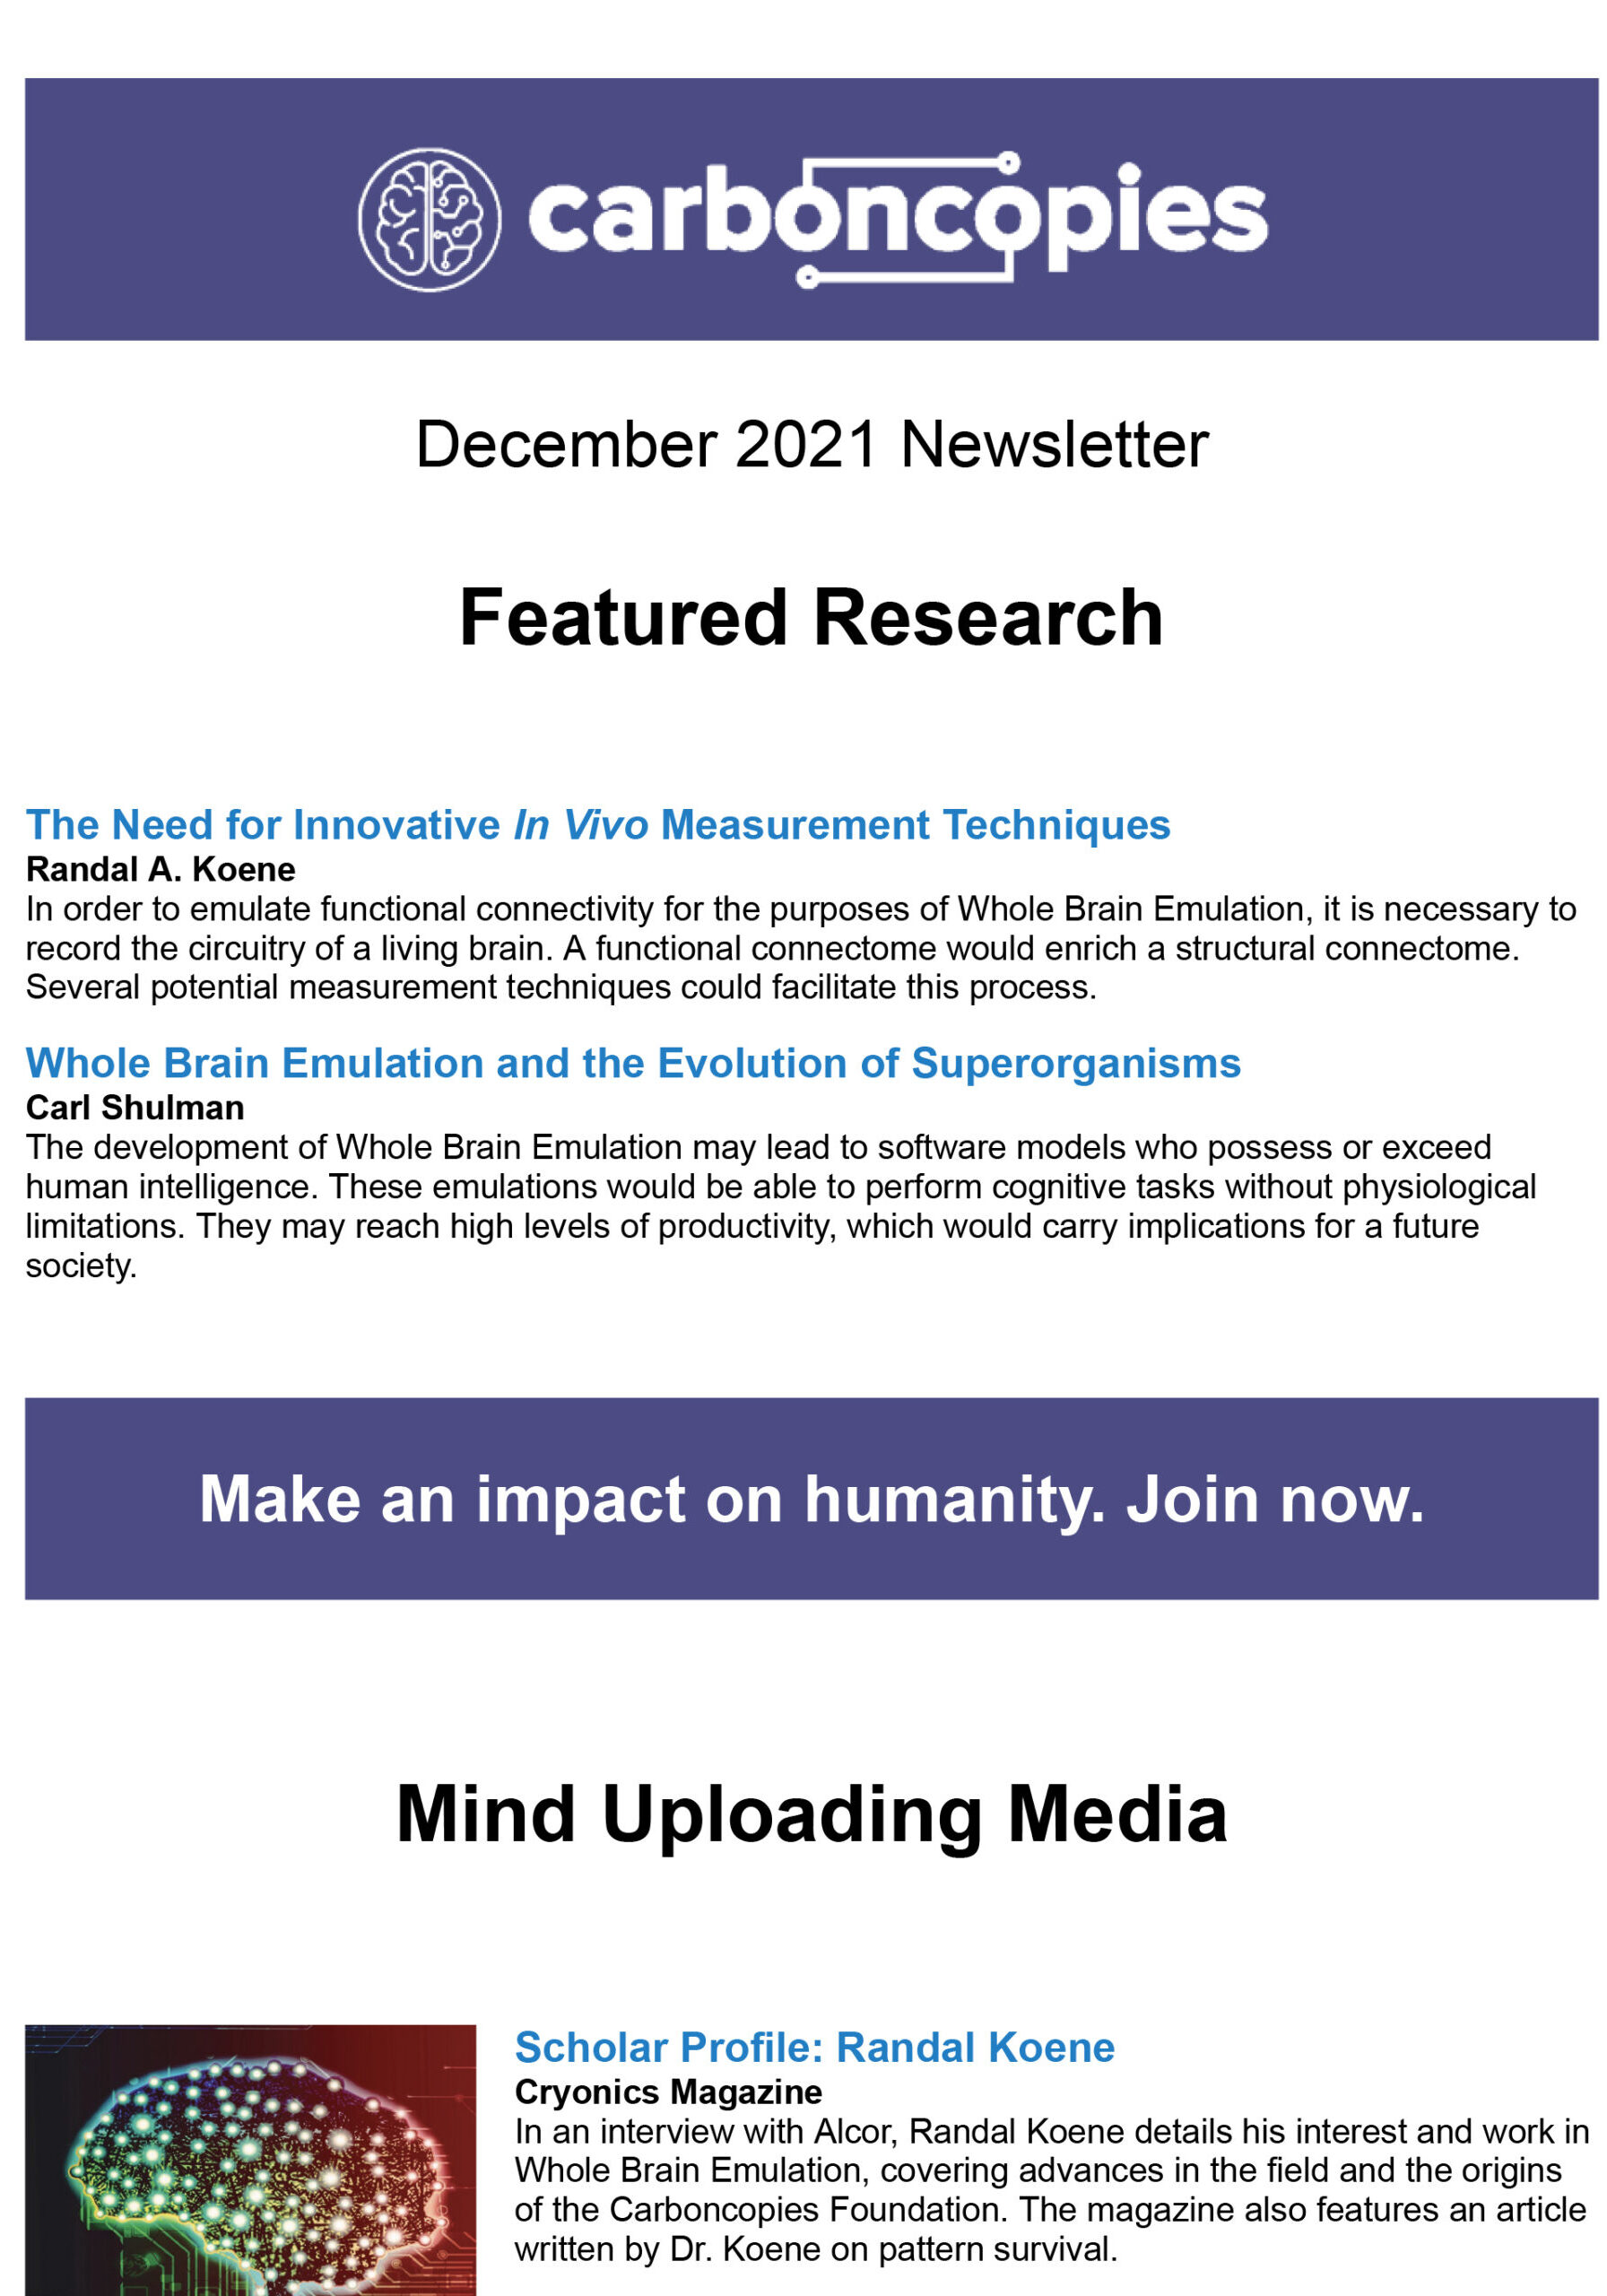 Carboncopies Foundation for Substrate-Independent Minds, Inc. Mail - Carboncopies December 2021 Newsletter-1